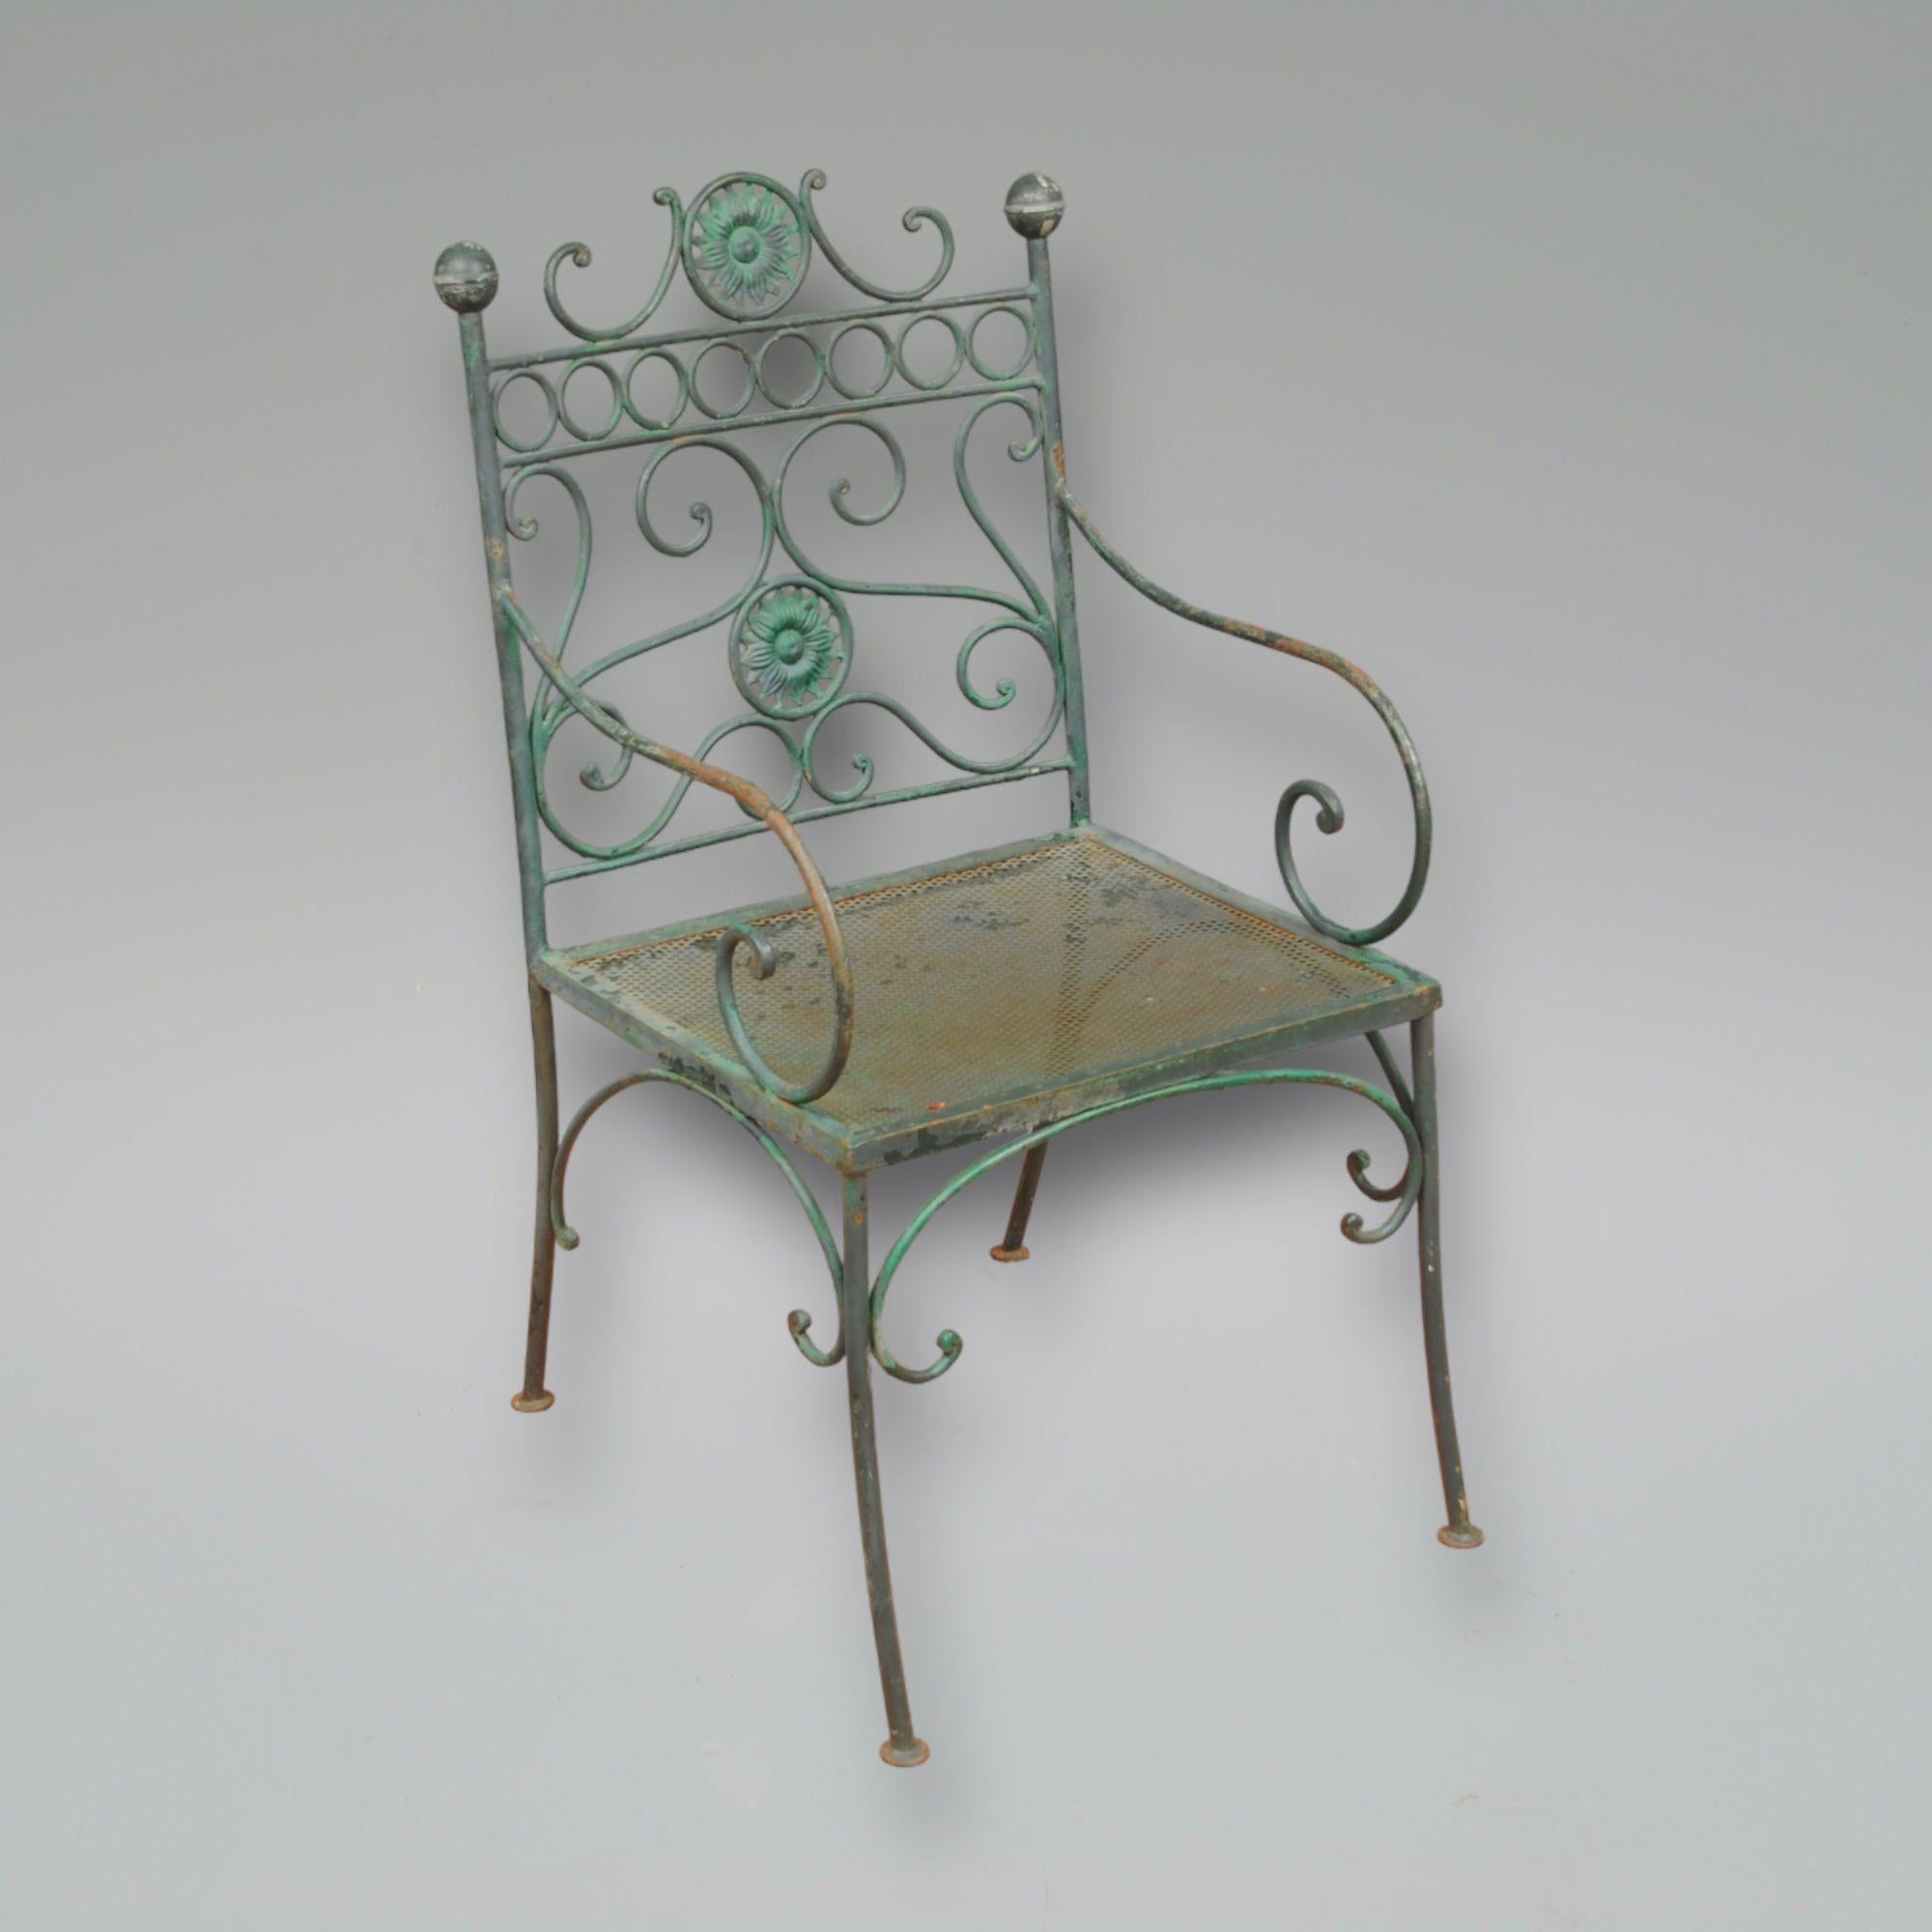 Painted A Set of Four Mid 20th Century French Metal Garden Chairs